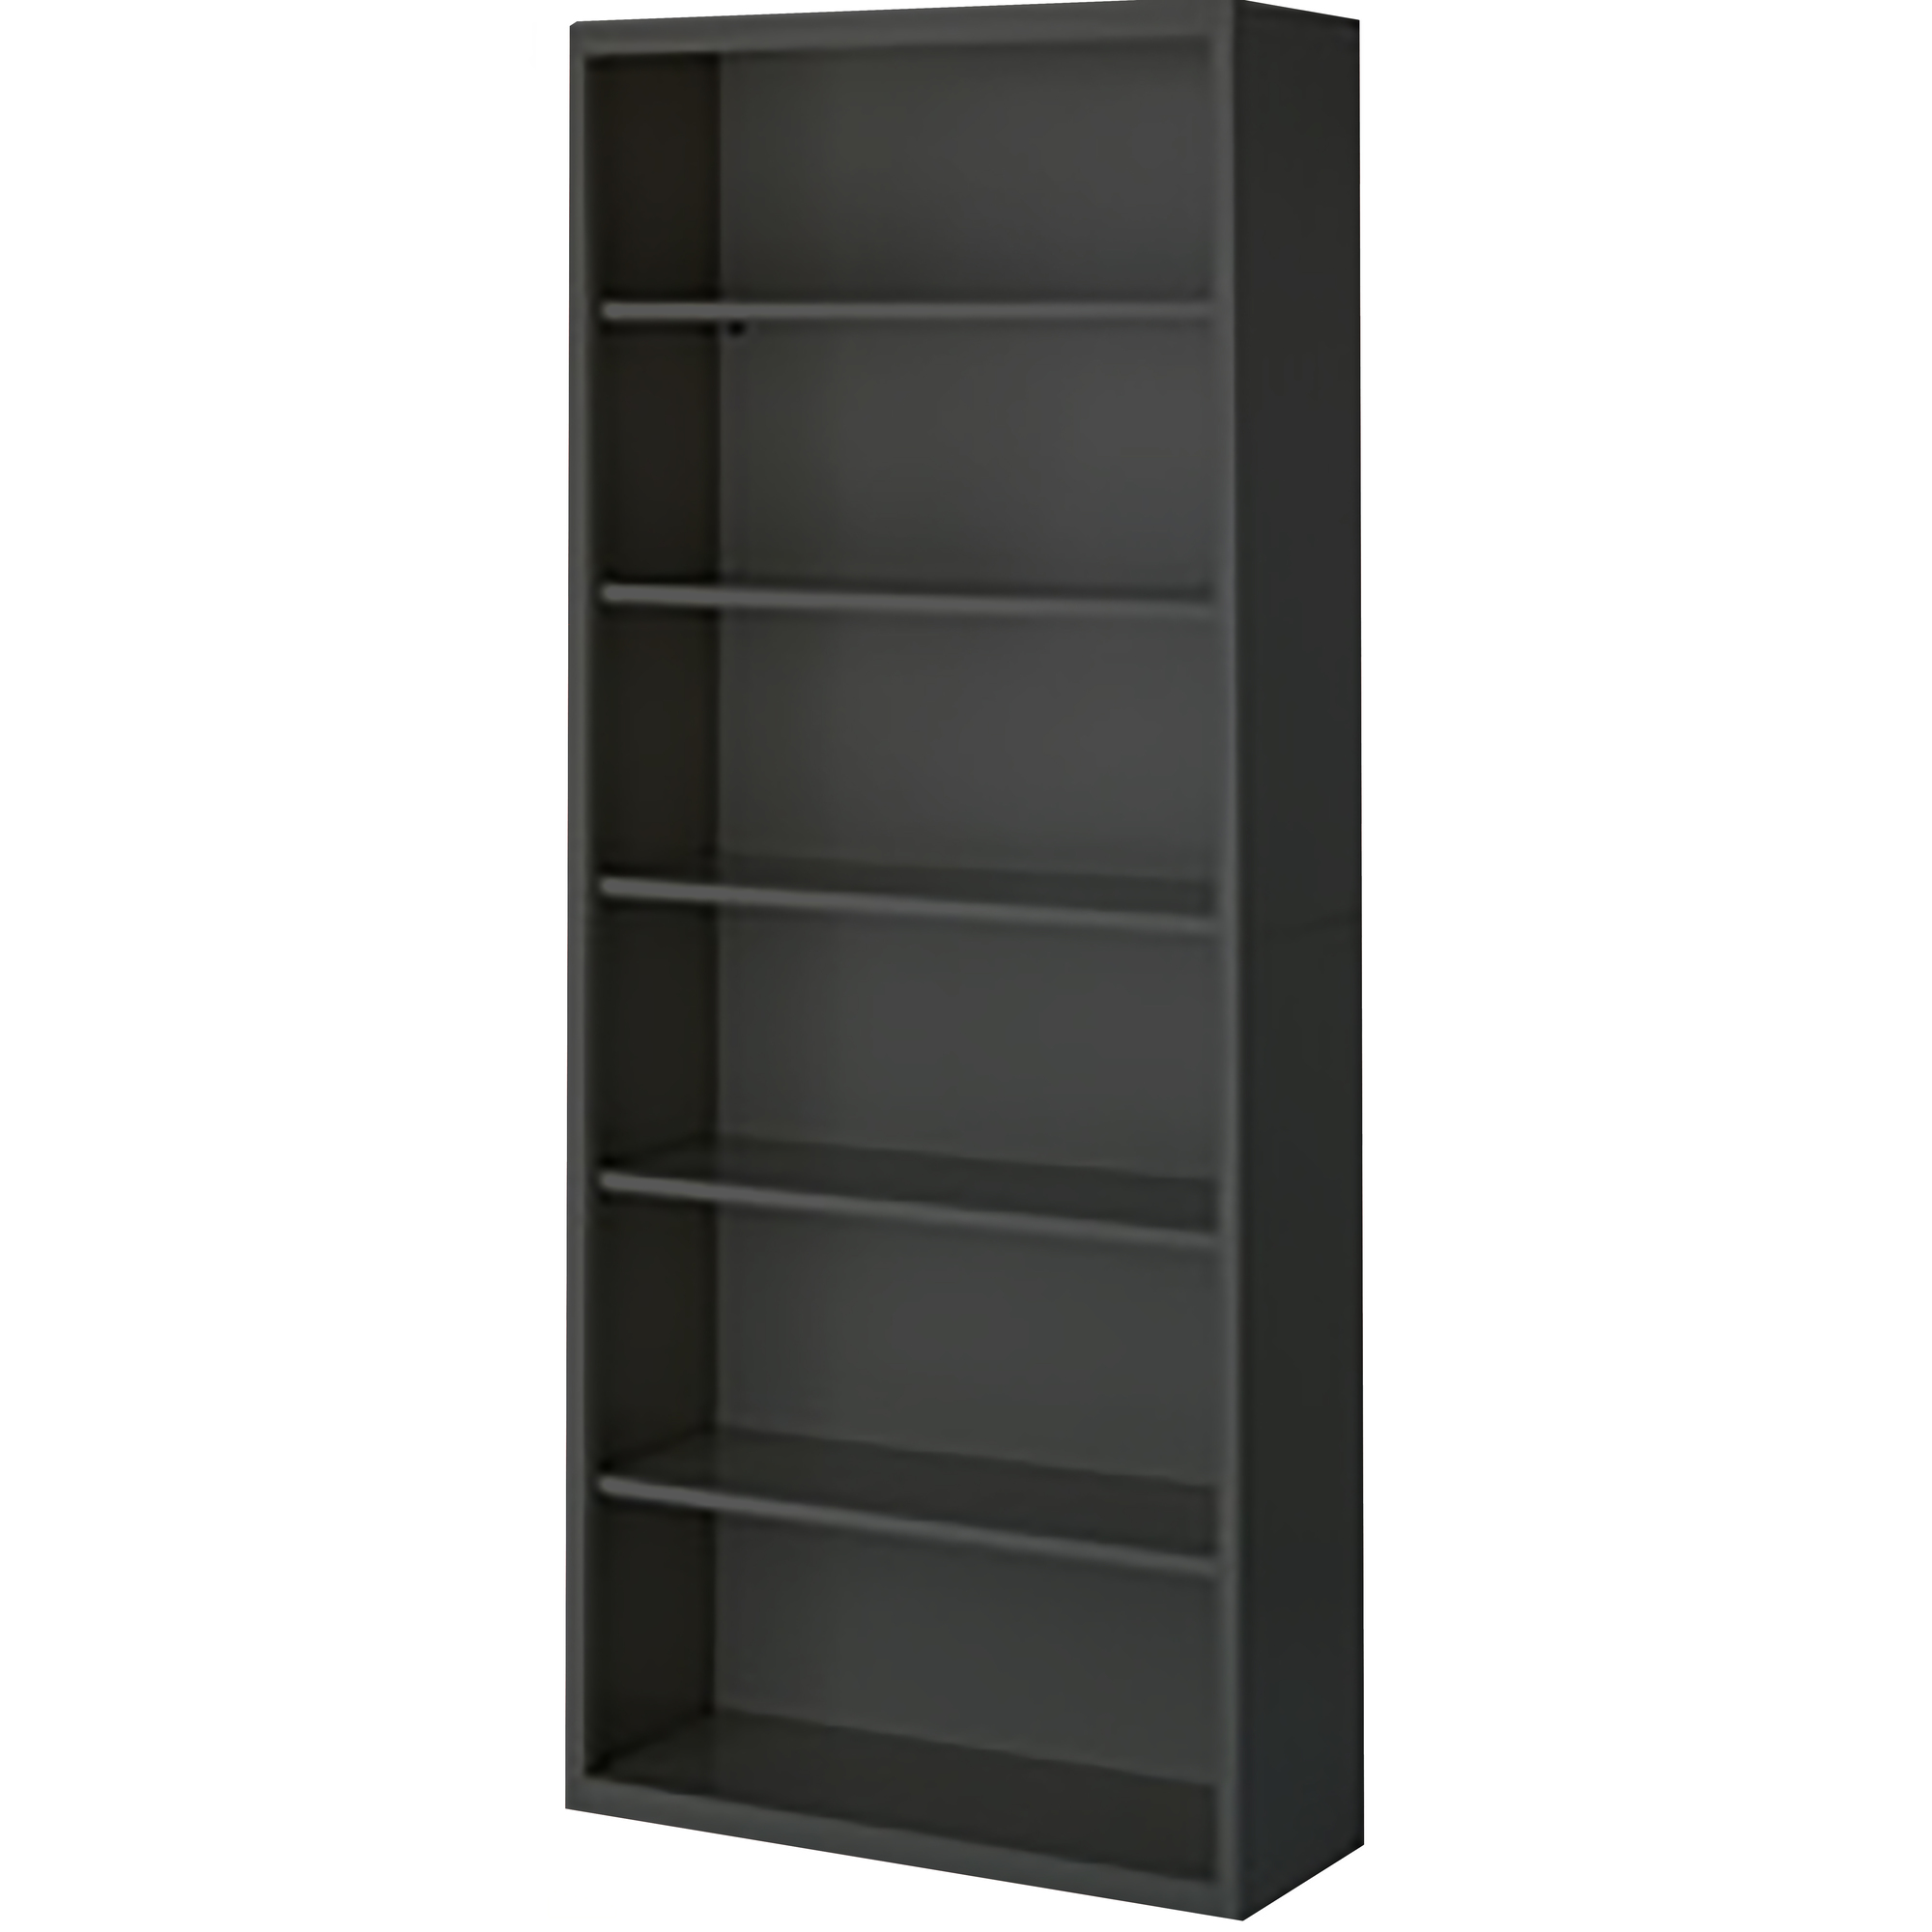 36Inchx18Inchx84Inch Charcoal Bookcase Steel Full Assembled, Height 84 in, Shelves (qty.) 6, Material Steel, Model - Steel Cabinets USA BCA-368418-C